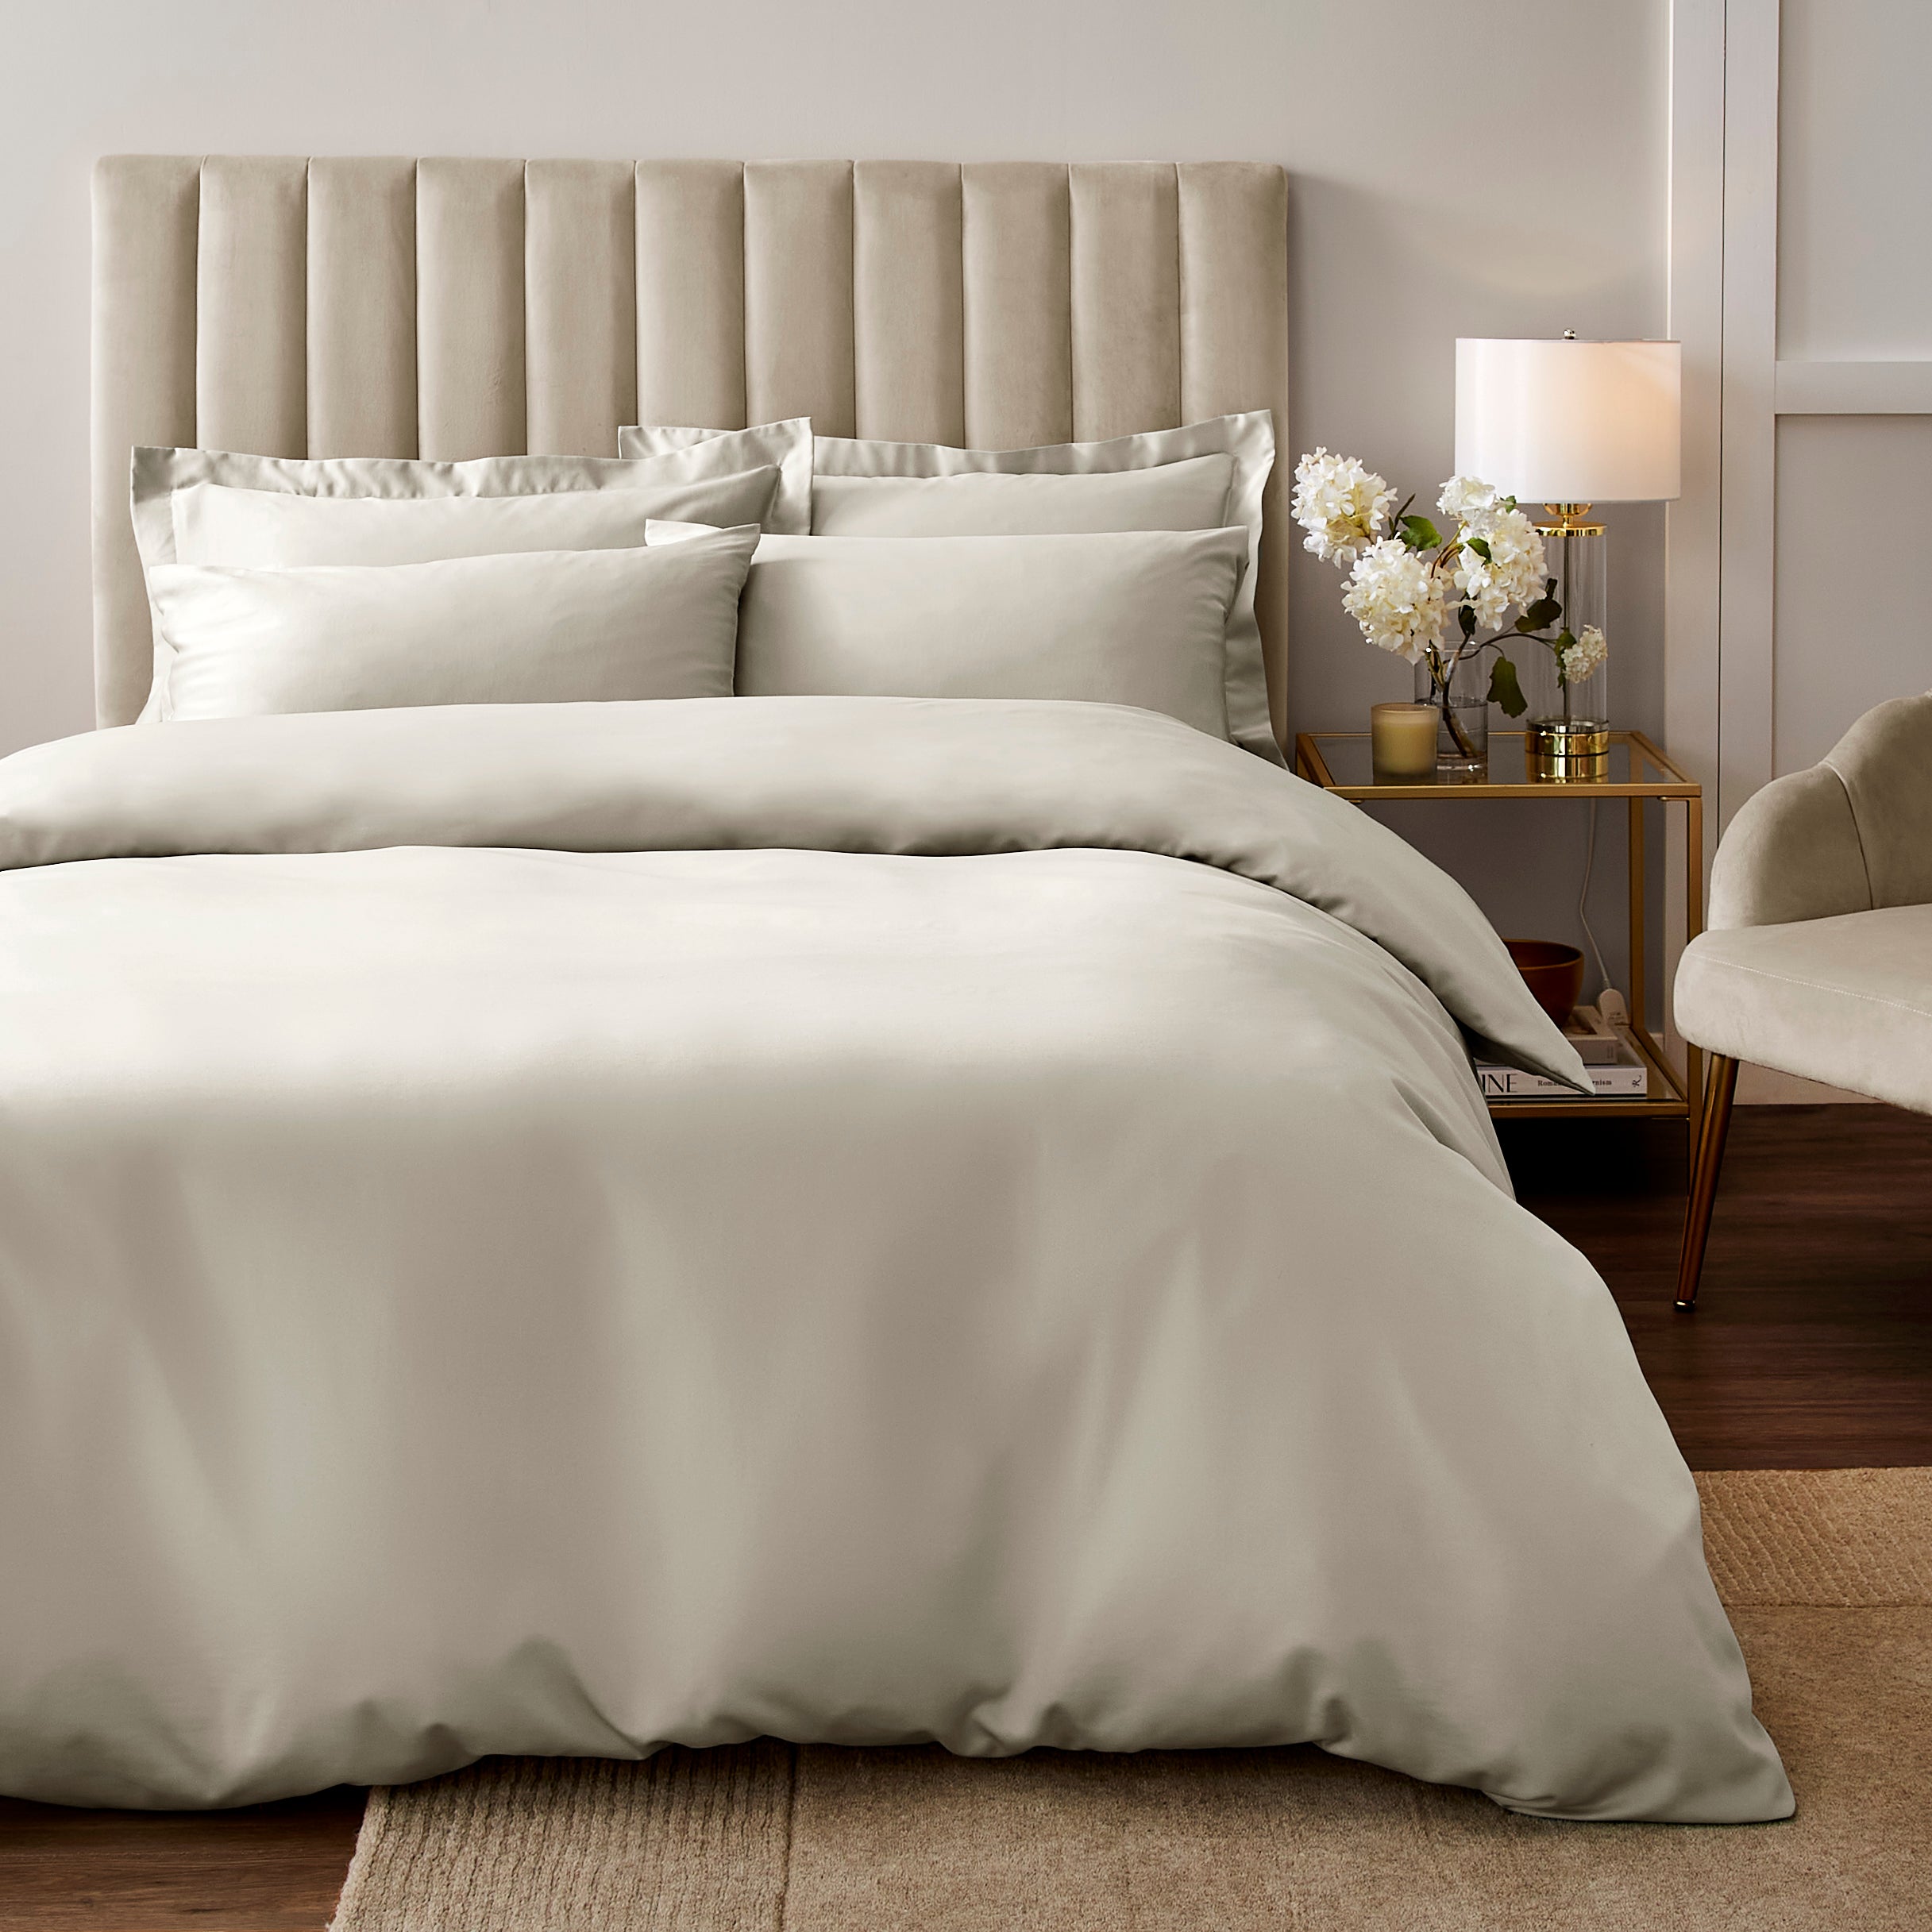 Soft Silky Duvet Cover And Pillowcase Set Natural